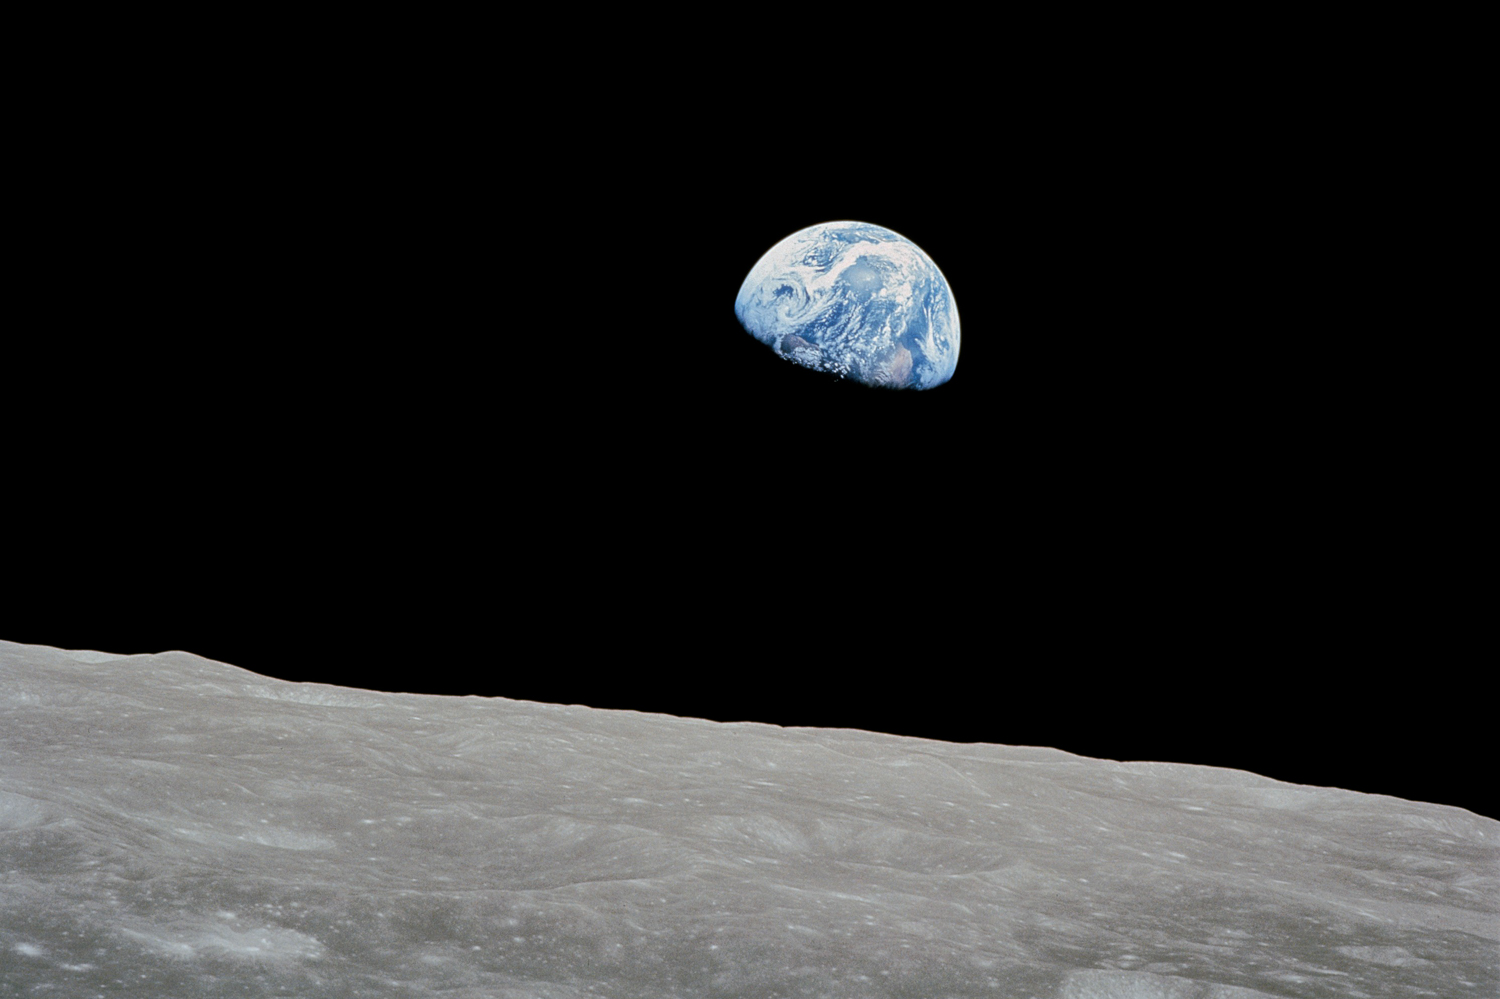 Truly the voyage of Apollo 8 over the Christmas period in 1968 carried with it the most profound message of the Greatest Story Ever Told: a message of peace, goodwill and harmony to the inhabitants of Planet Earth. Photo Credit: NASA